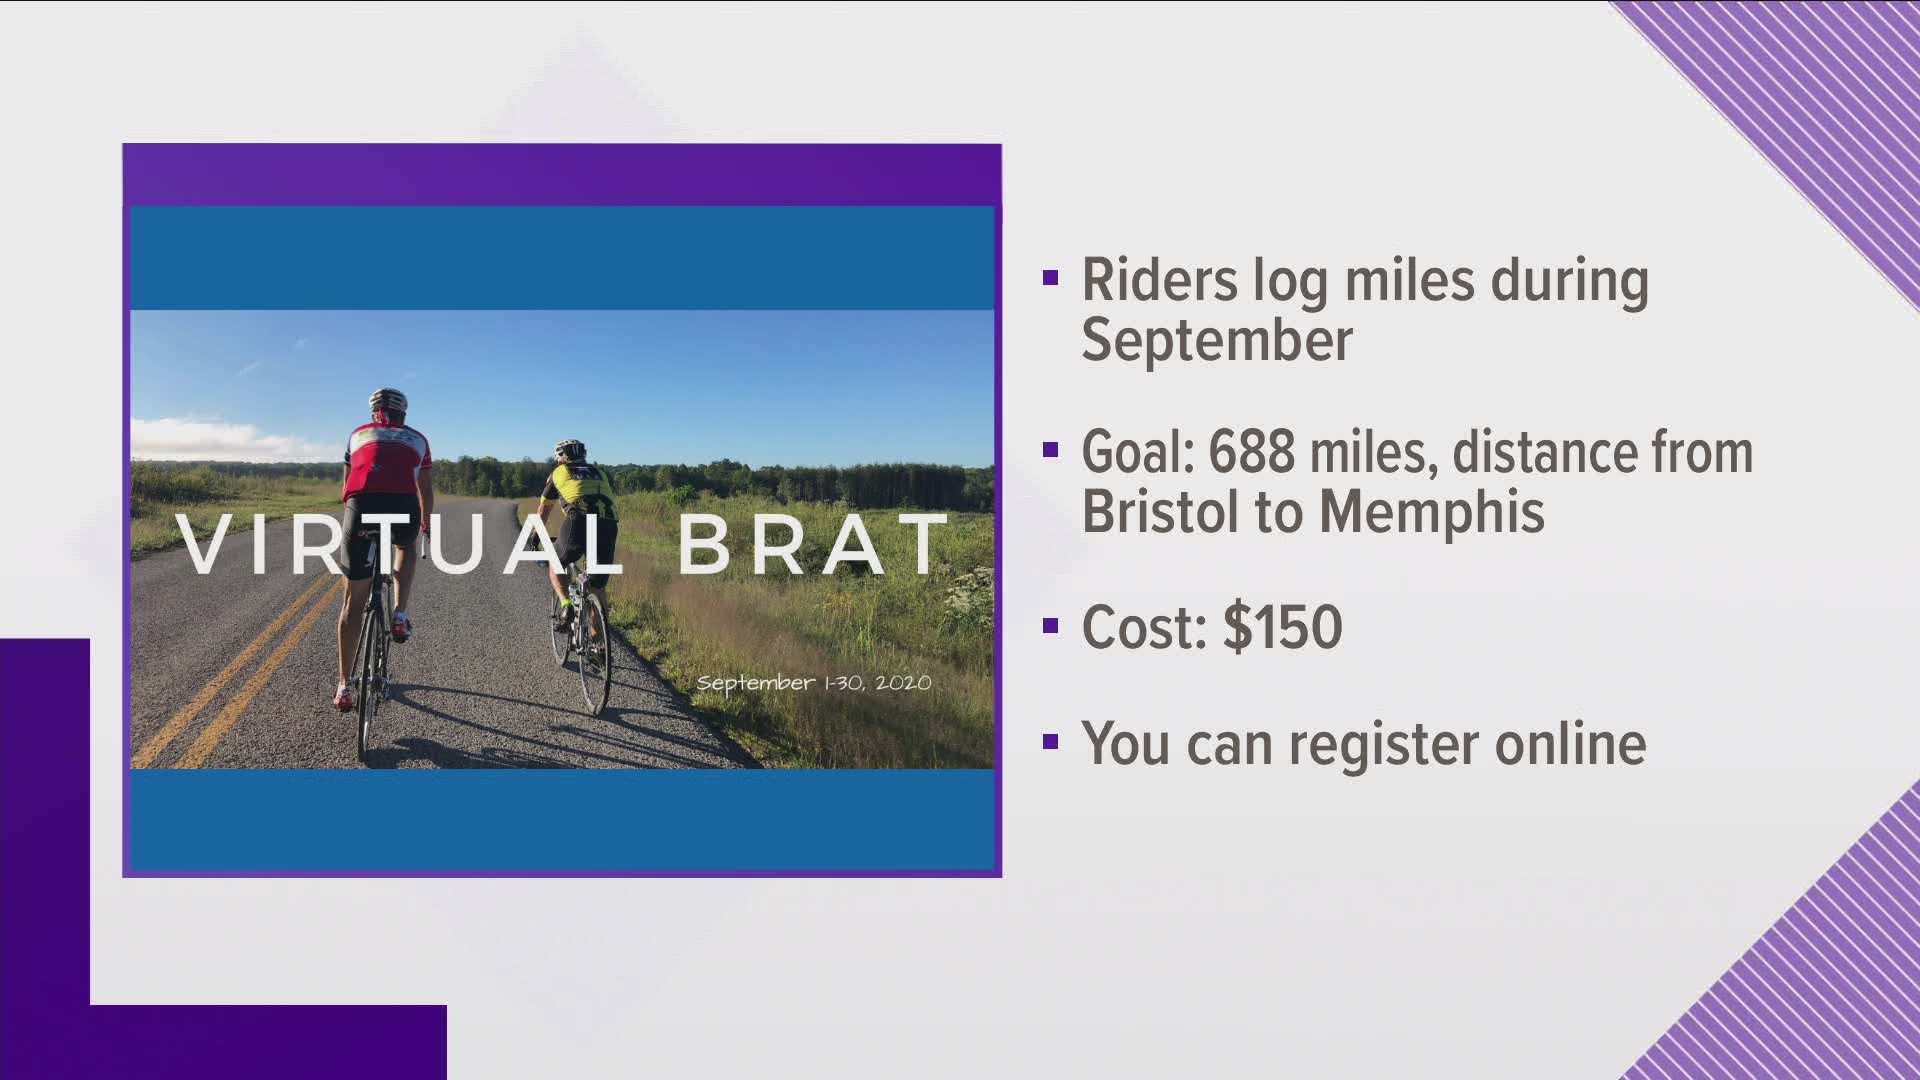 The goal is for participants to ride 688 miles during the month. That's the distance from Bristol to Memphis.